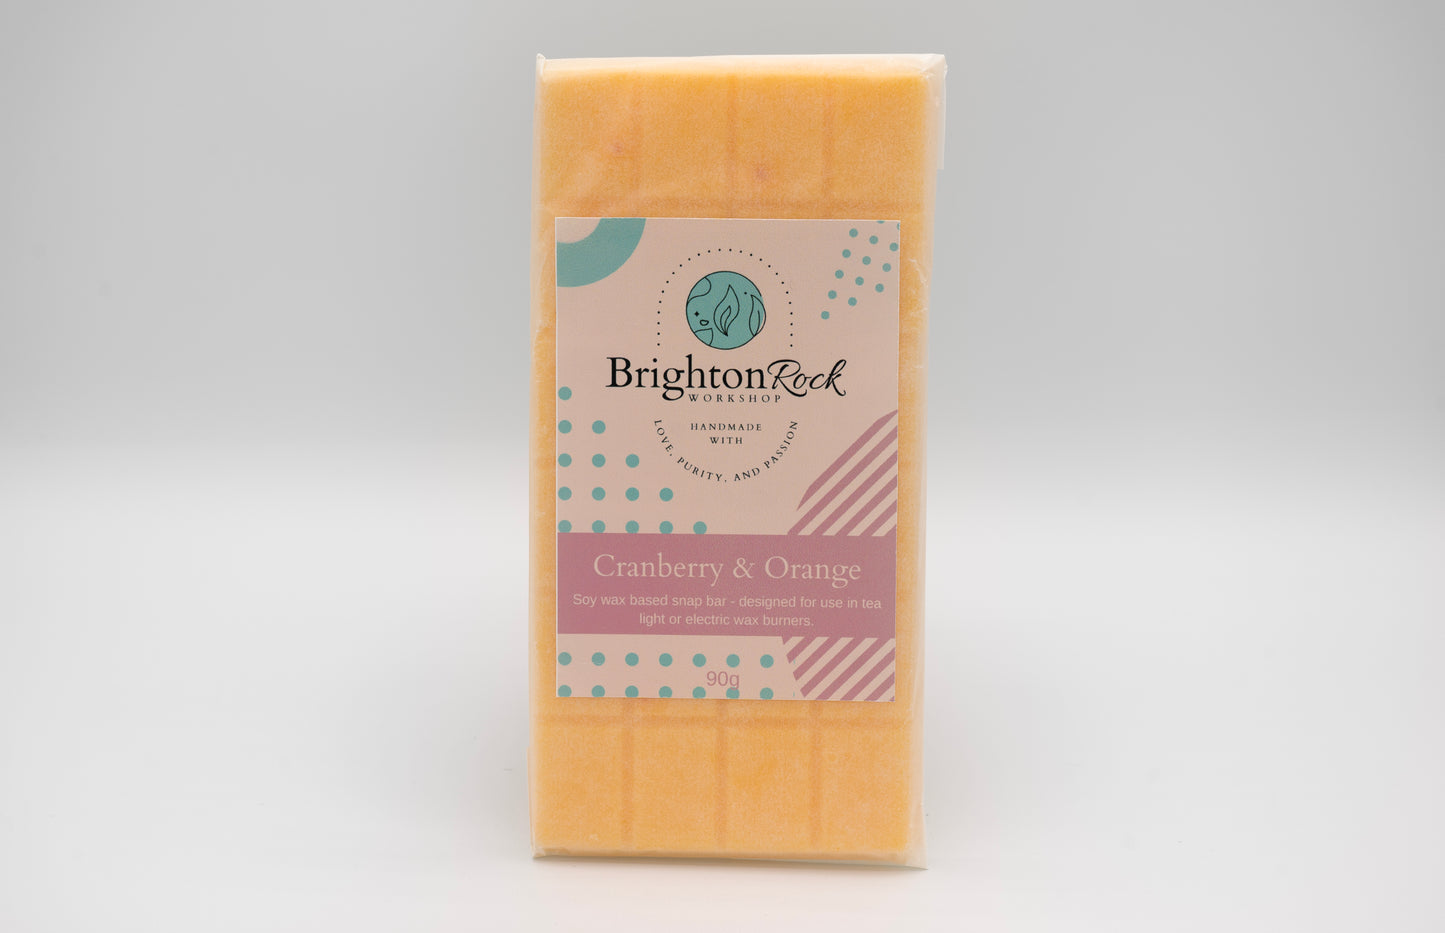 cranberry & orange 30g or 90g strongly scented wax melt snap bars. Eco friendly waxed paper packaging. Brighton Rock Workshop wax melts made in Spain and the United Kingdom, available in two sizes. Suitable for tea light or electric burners